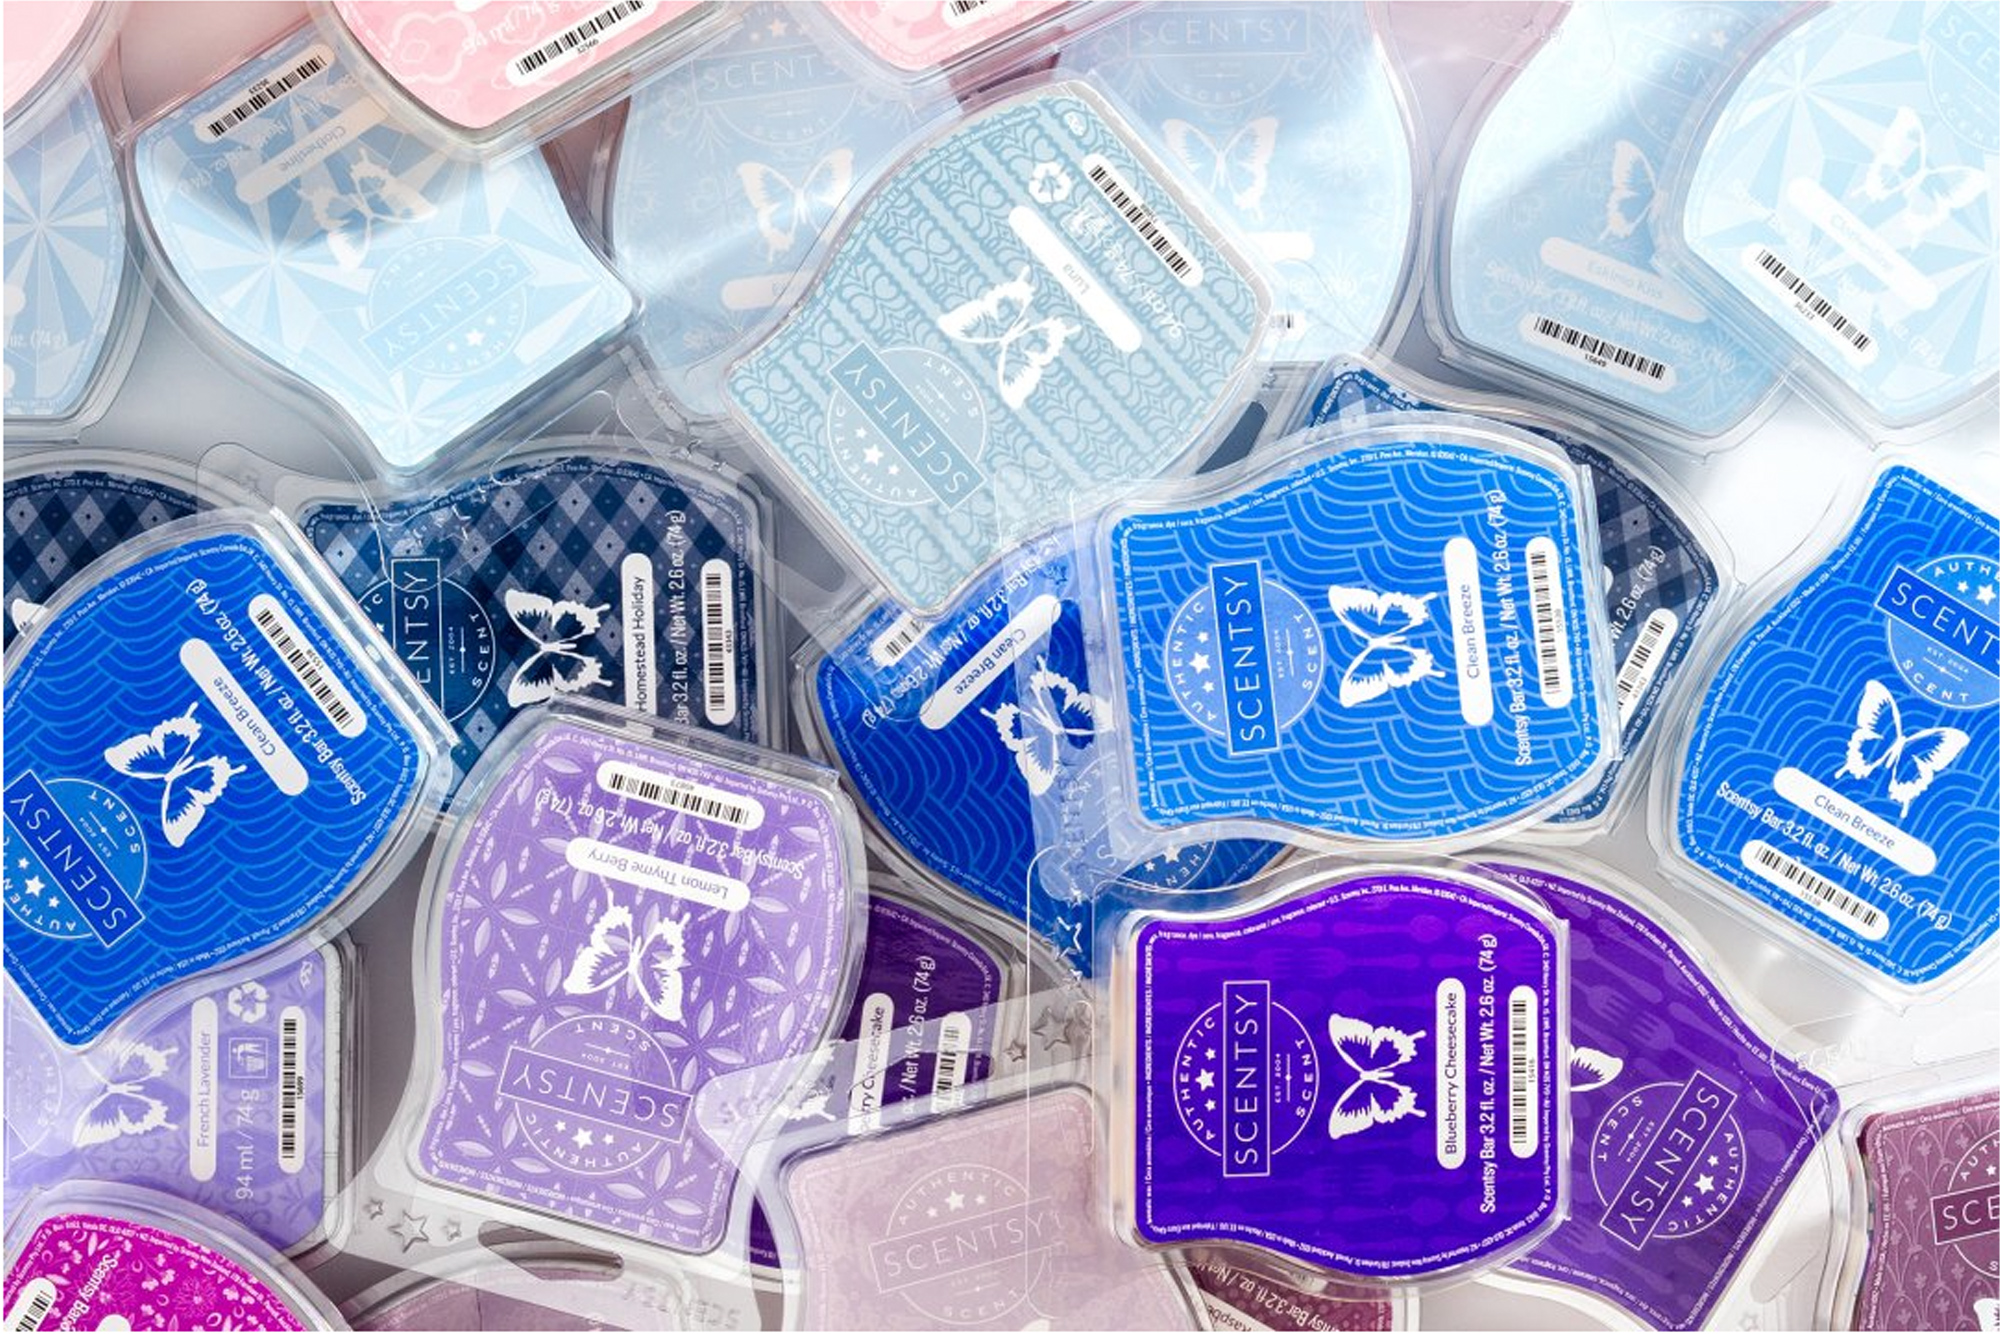 Collection of Scentsy Wax Bars